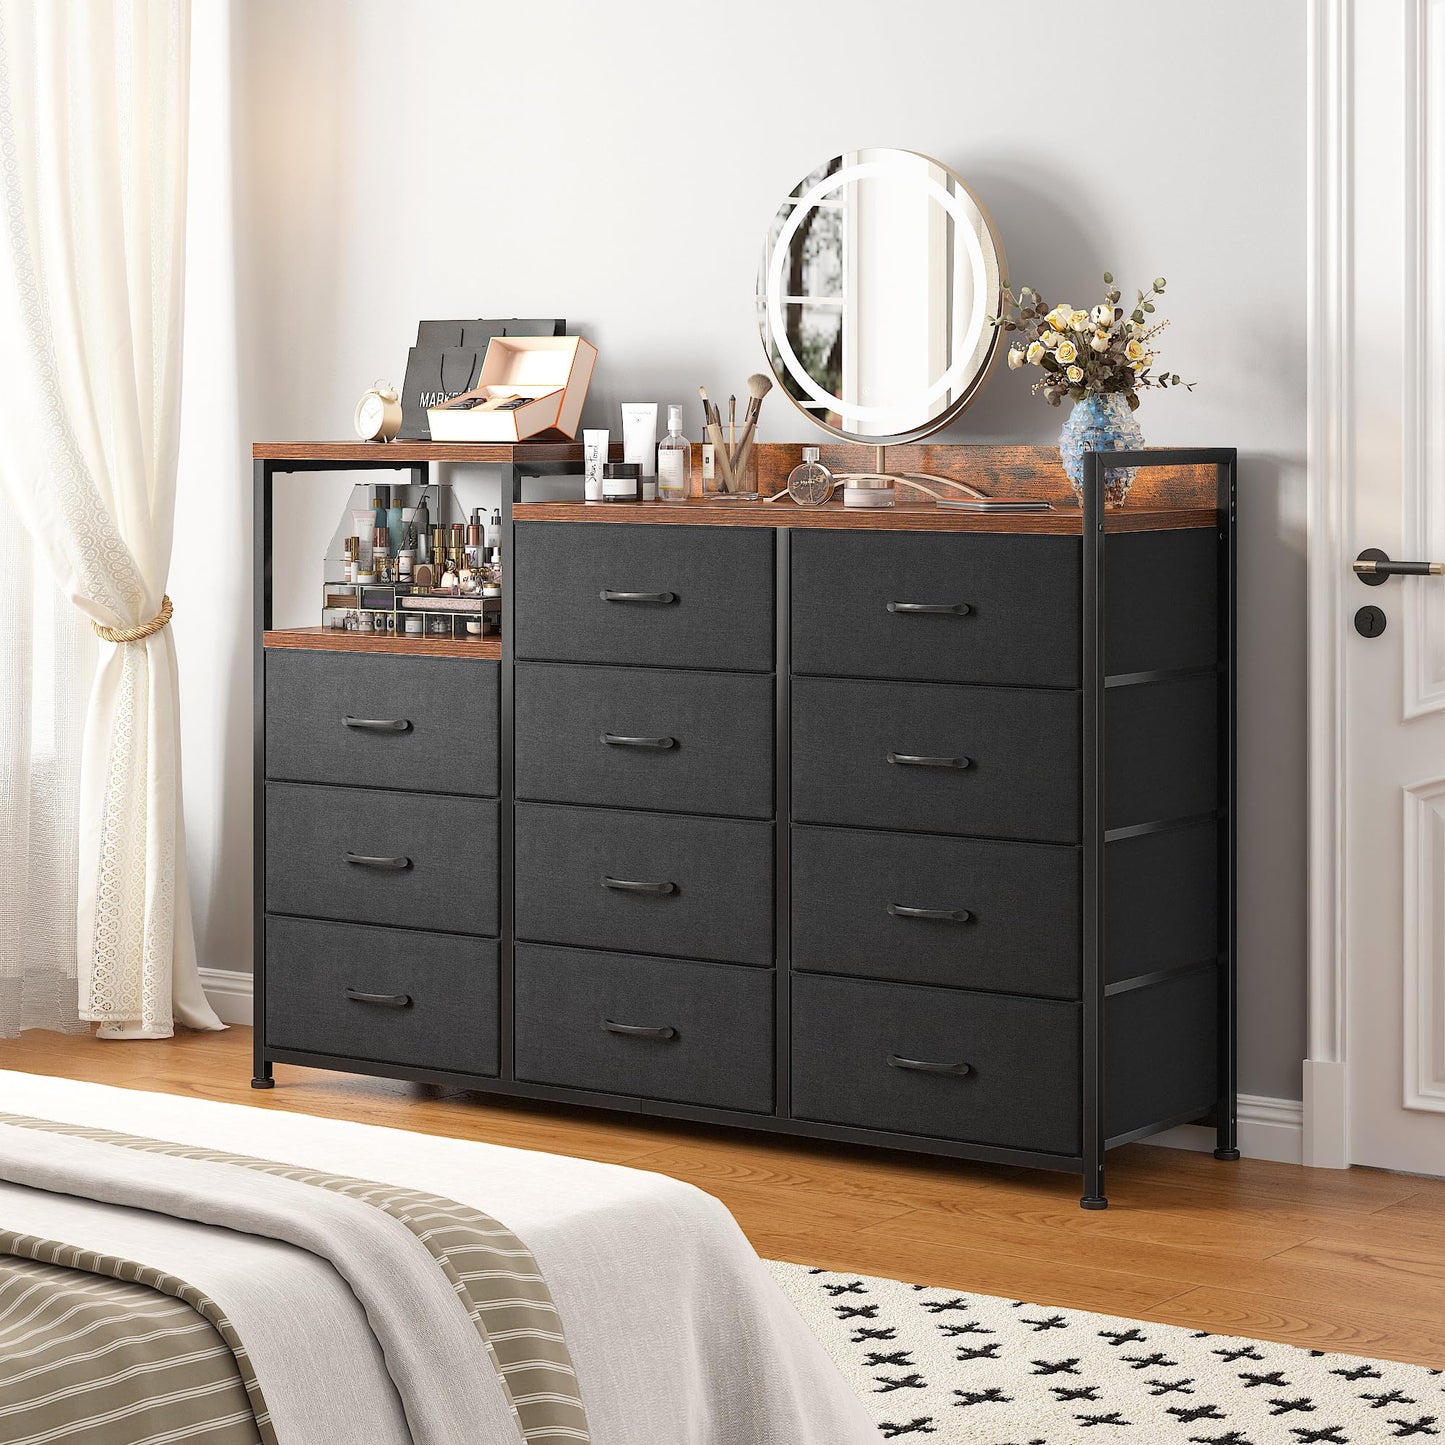 Hana Exports Dresser, Dresser for Bedroom with 11 Drawers, Dresser TV Stand with Shelves, Long Dressers & Chests of Drawers, Wide Dresser for Bedroom Dresser with Sturdy Metal Frame & Wood Top, Black